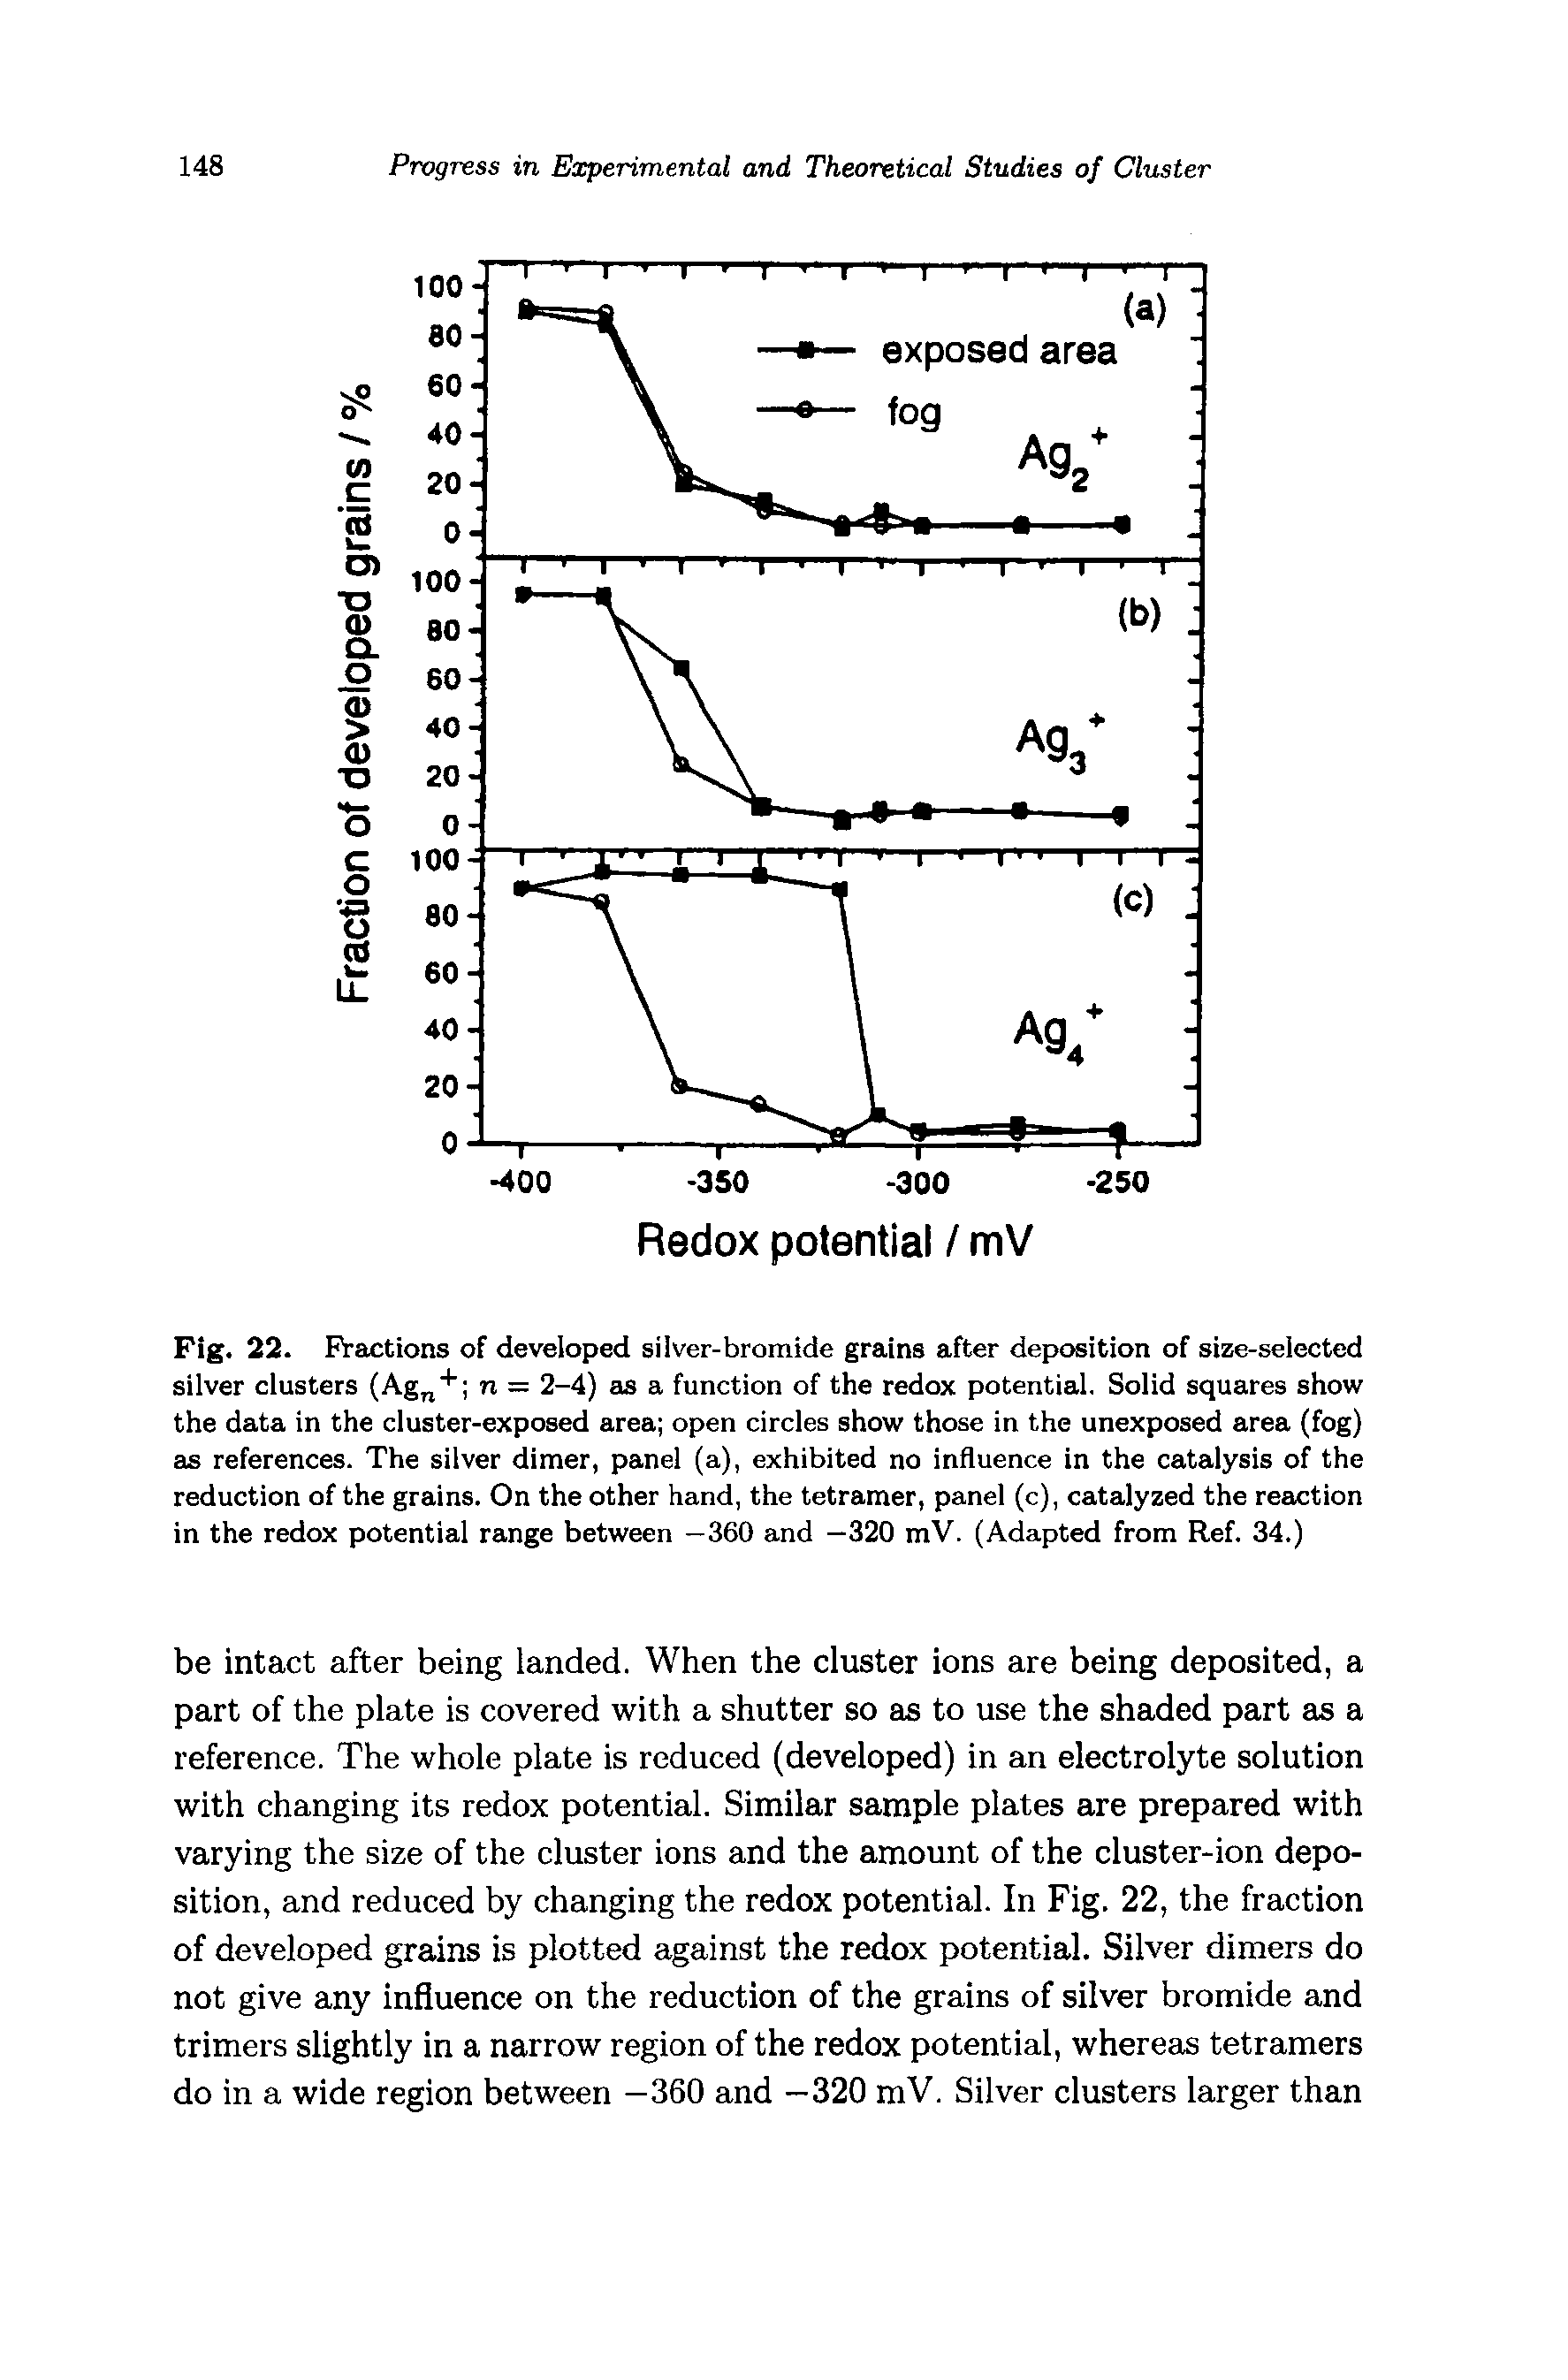 Fig. 22. FVactions of developed silver-bromide grains after deposition of size-selected silver clusters (Ag n = 2-4) as a function of the redox potential. Solid squares show the data in the cluster-exposed area open circles show those in the unexposed area (fog) as references. The silver dimer, panel (a), exhibited no influence in the catalysis of the reduction of the grains. On the other hand, the tetramer, panel (c), catalyzed the reaction in the redox potential range between —360 and —320 mV. (Adapted from Ref. 34.)...